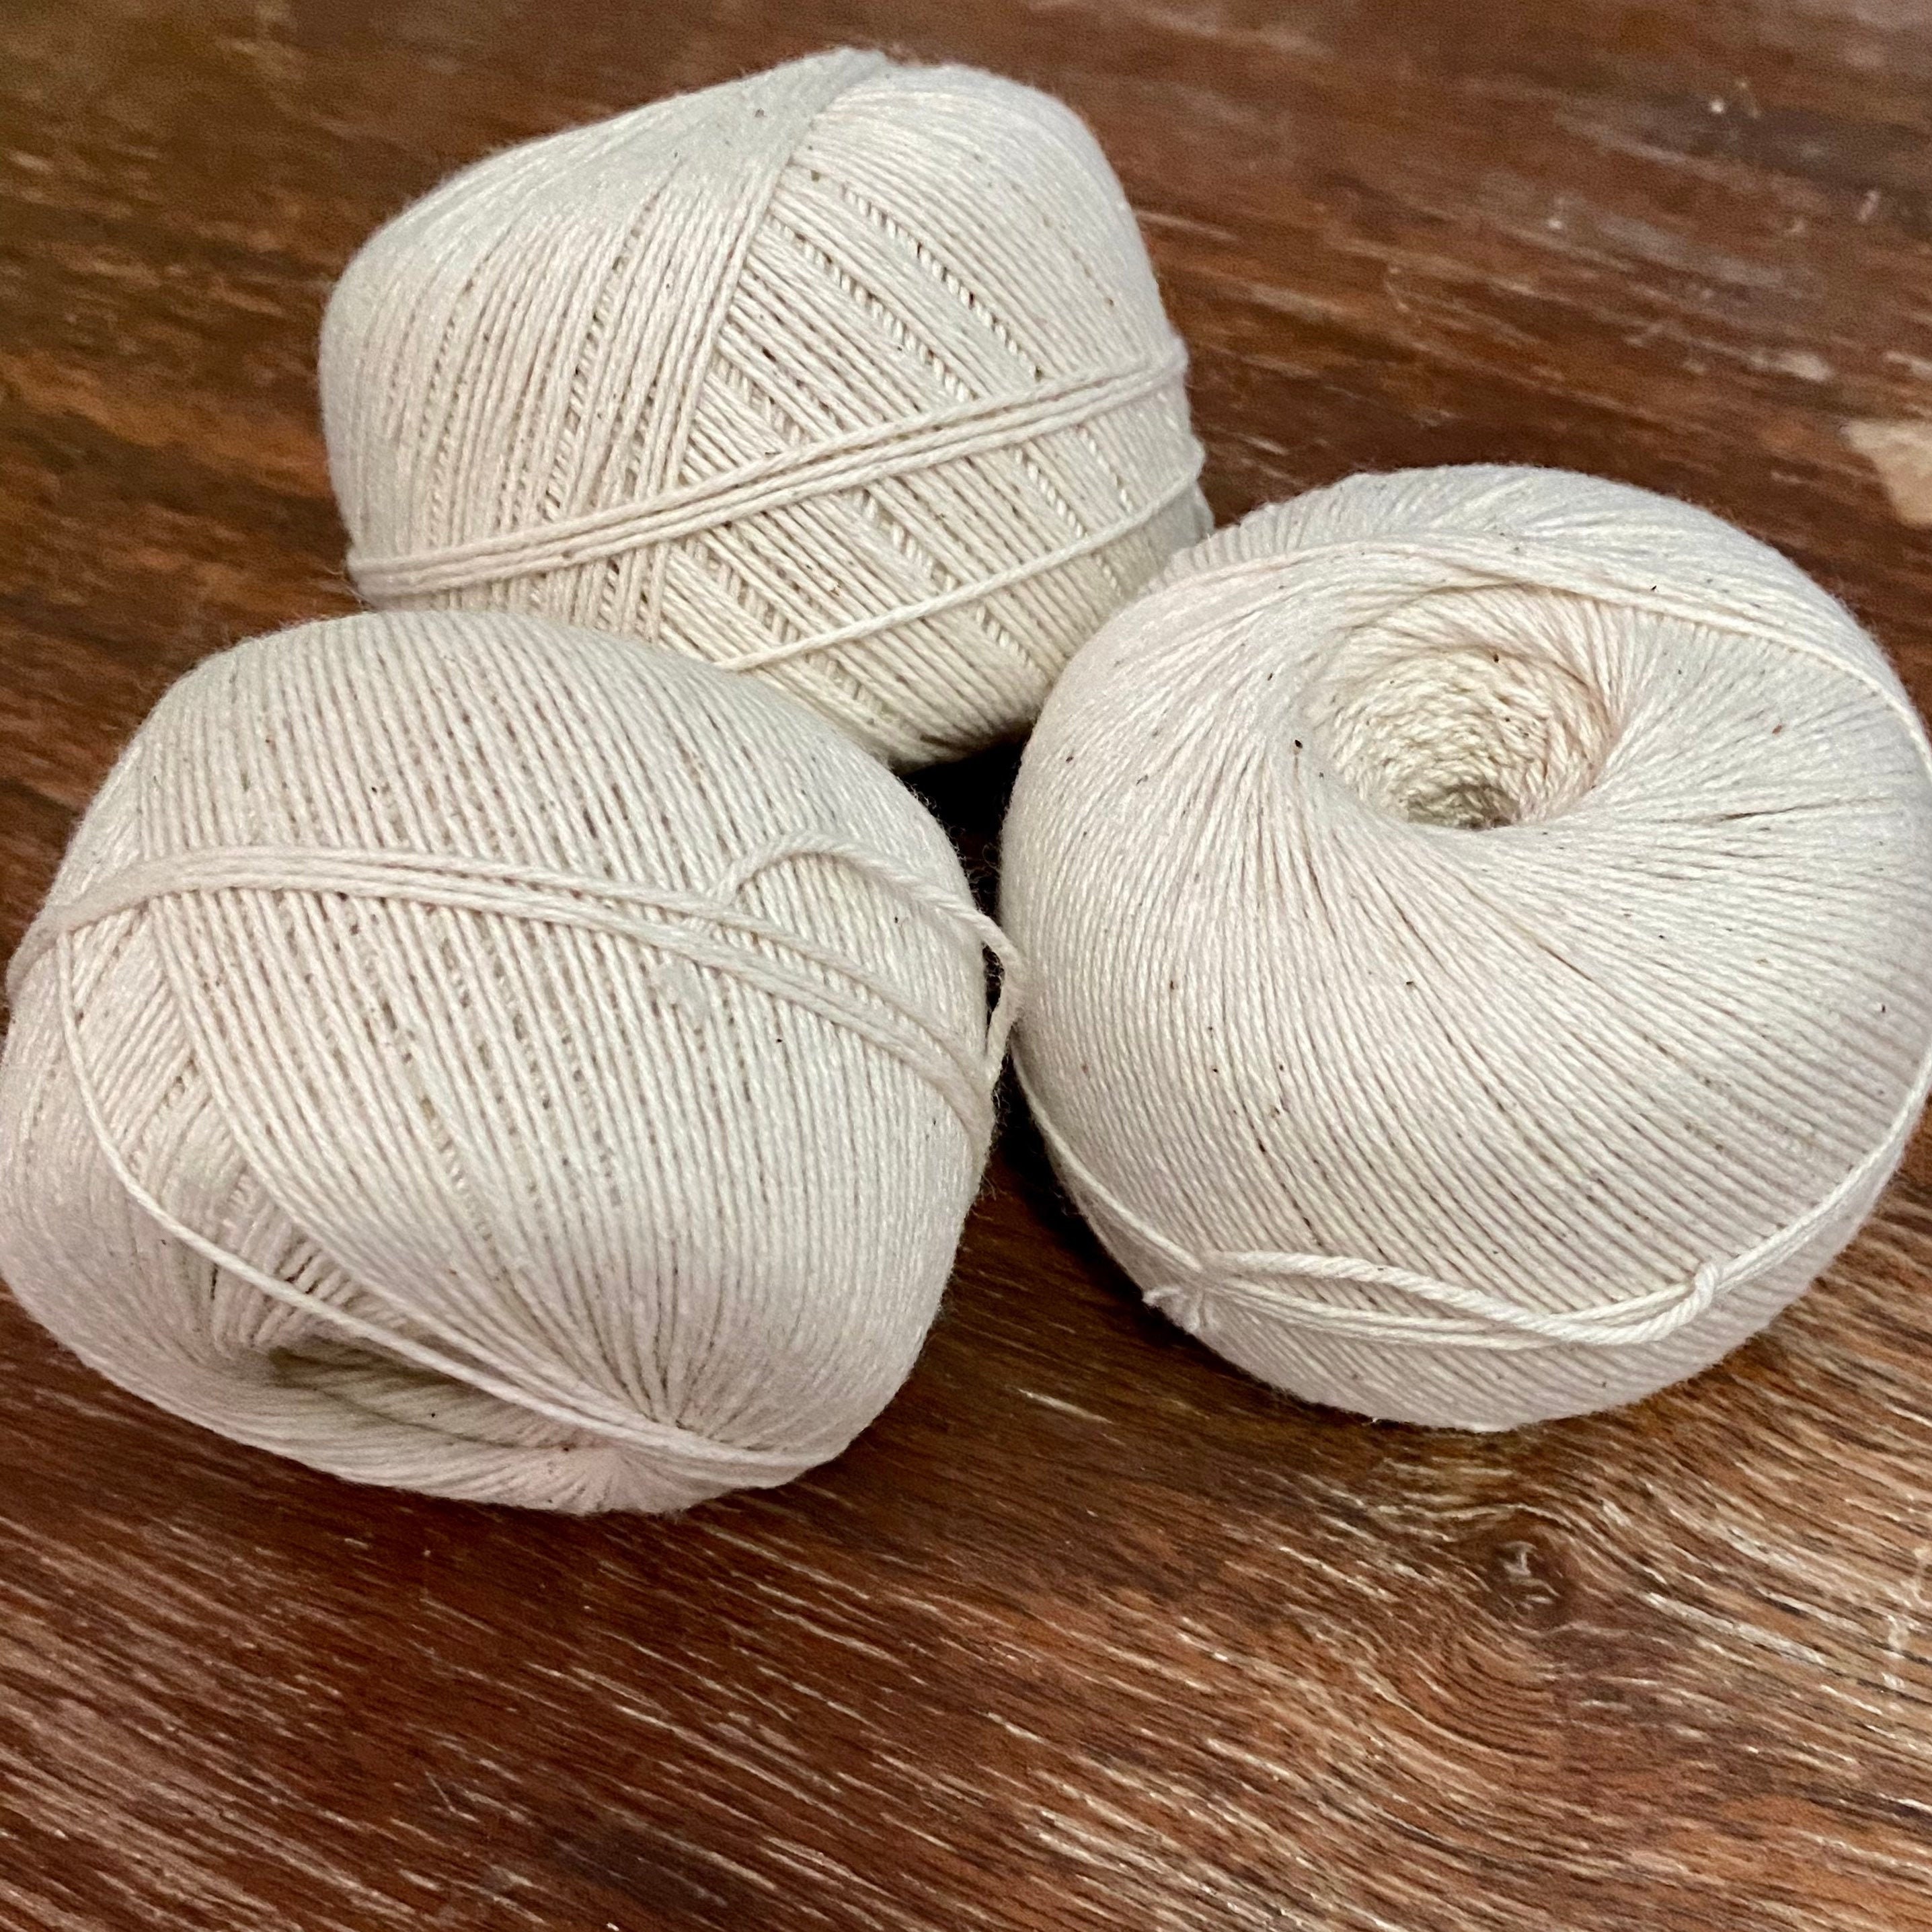 100yards/spool Cotton Twine String Cord Rope Rustic Craft Twine